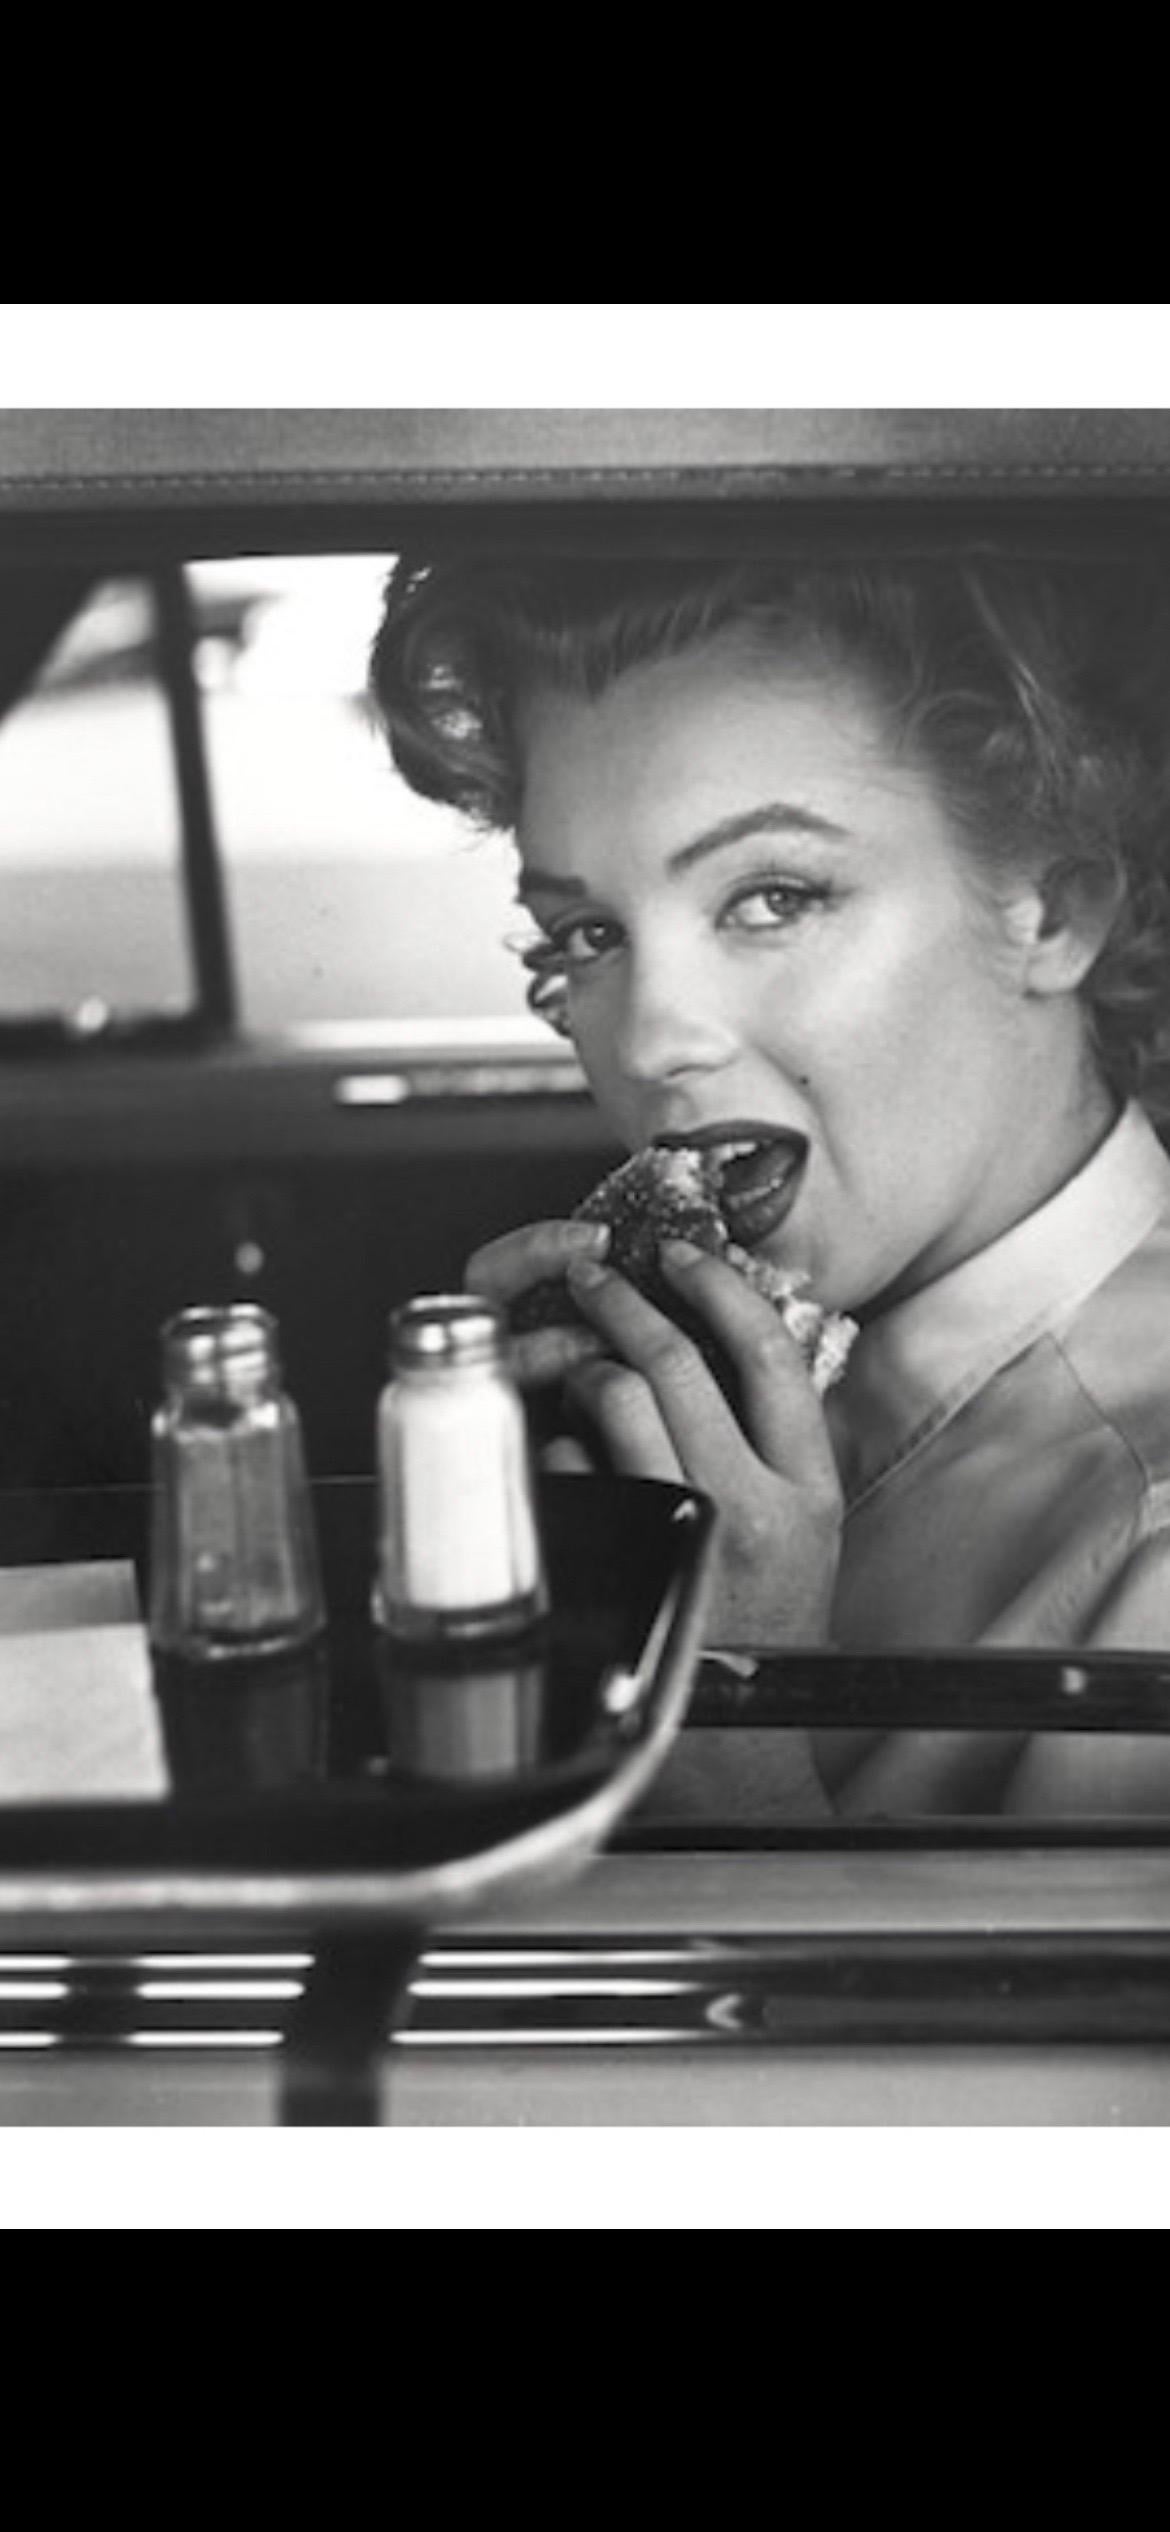 Philippe Halsman (1906-1979)
Marilyn Monroe (At a drive-in, eating a hamburger), 1952
Gelatin silver print, printed 1981, numbered '226/250' in ink and portfolio copyright credit stamp on the verso.
Measures: 10 x 13in (25.4 x 33in)
sheet 11 x 14in